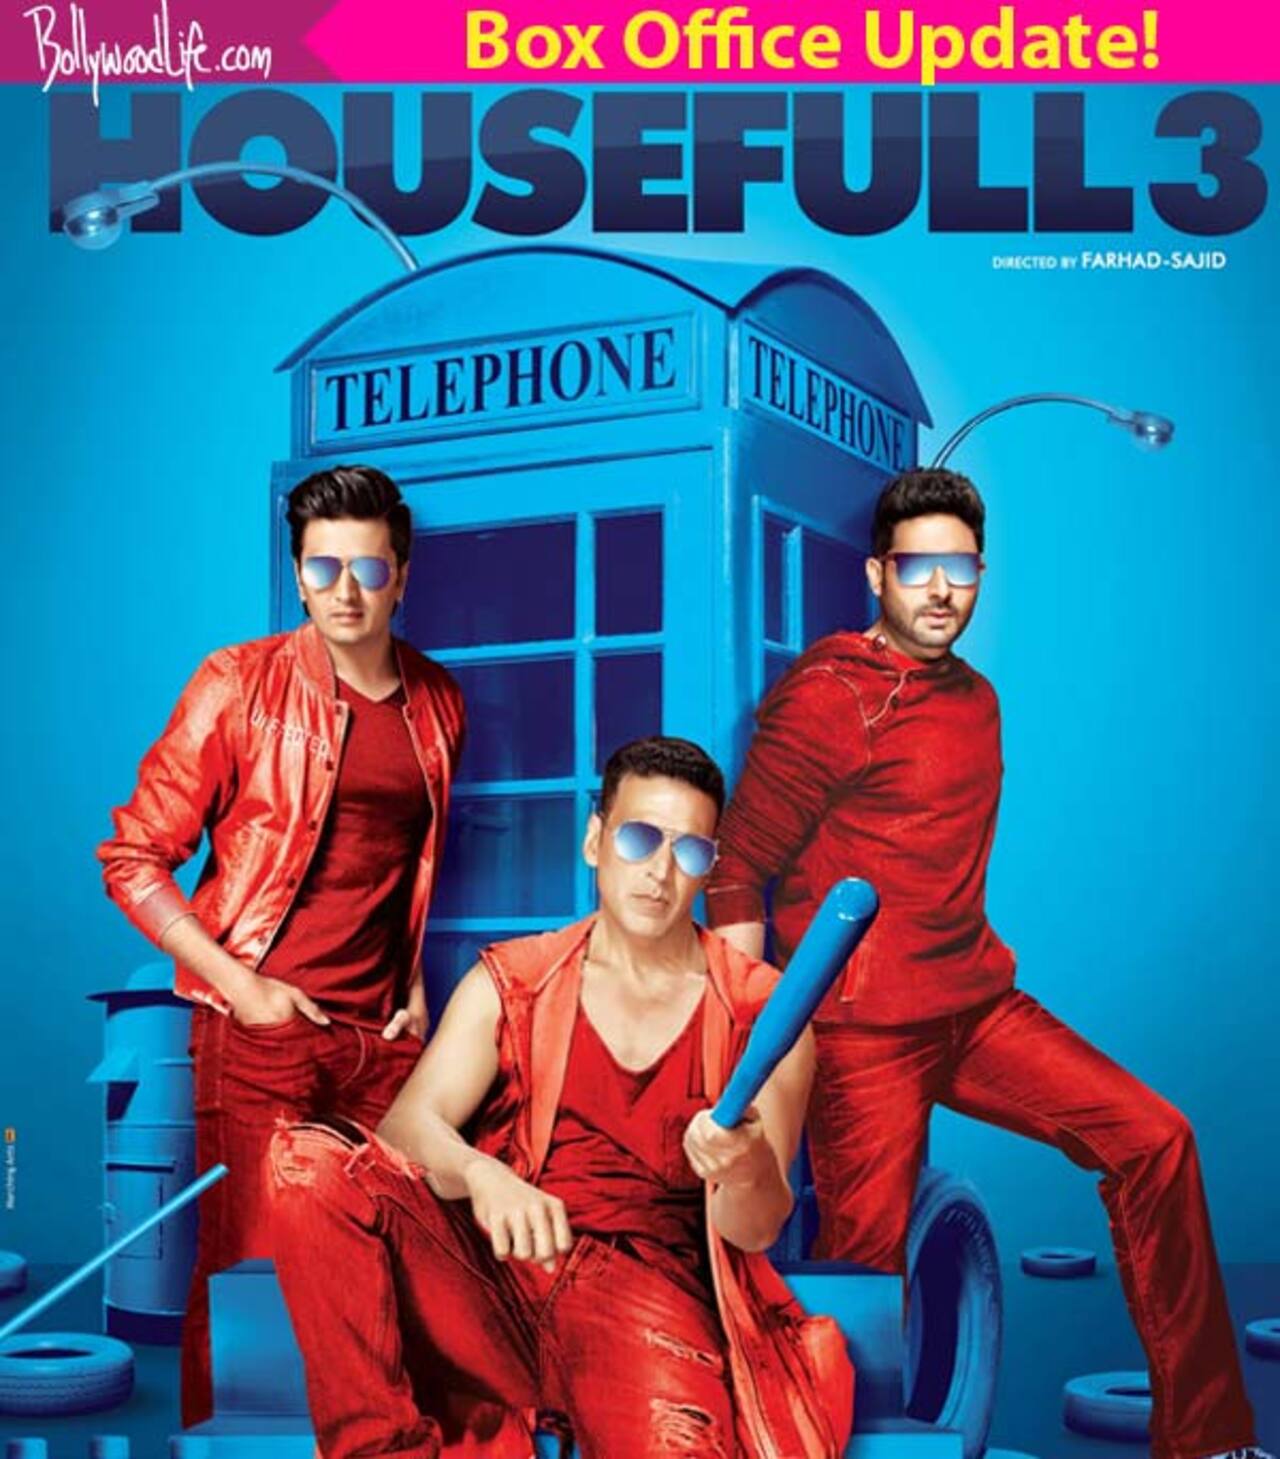 Housefull 3 box office collection: Akshay Kumar and Jacqueline Fernandez's comedy earns Rs 61.56 crore in 4 days!